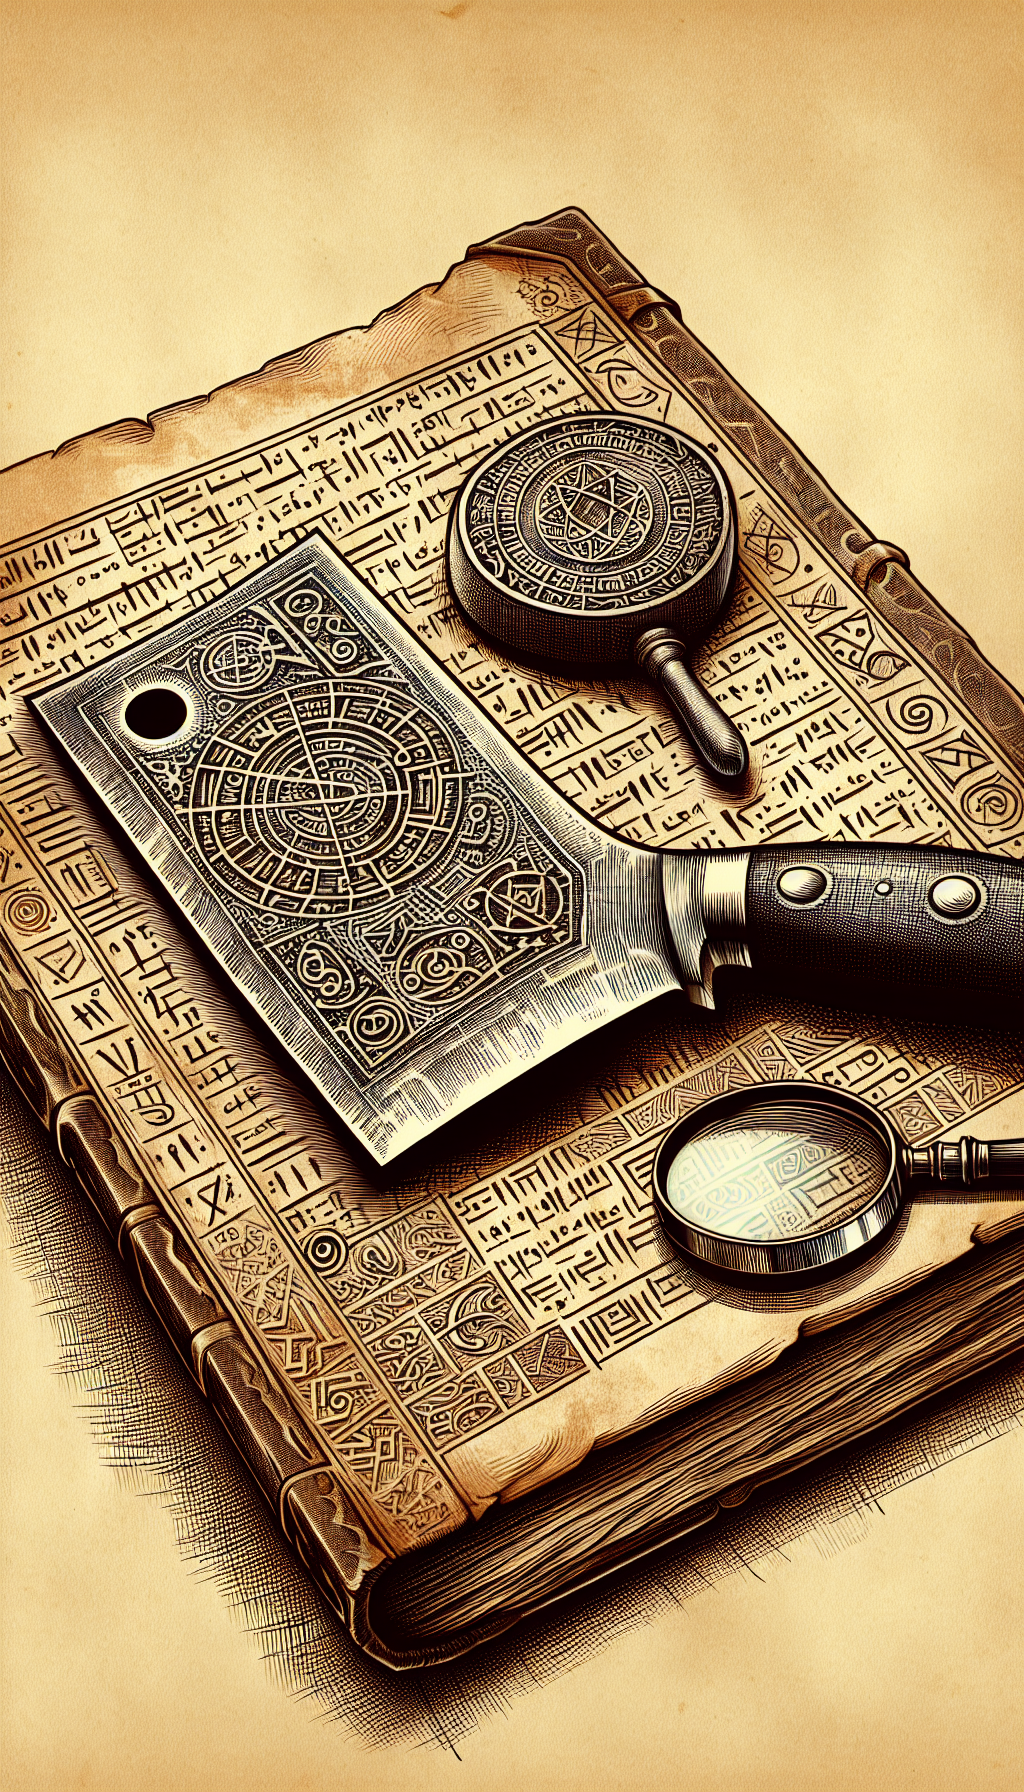 An illustration of a weathered antique meat cleaver resting on a faded manuscript. The cleaver's blade is etched with intricate, cryptic stamps and symbols that blend into ancient texts beneath, alluding to a historical narrative. A magnifying glass sits alongside, highlighting details and implying the process of decoding hidden stories behind the markings. The styles alternate between vintage, sepia-toned realism and vibrant, modern linework for contrast.